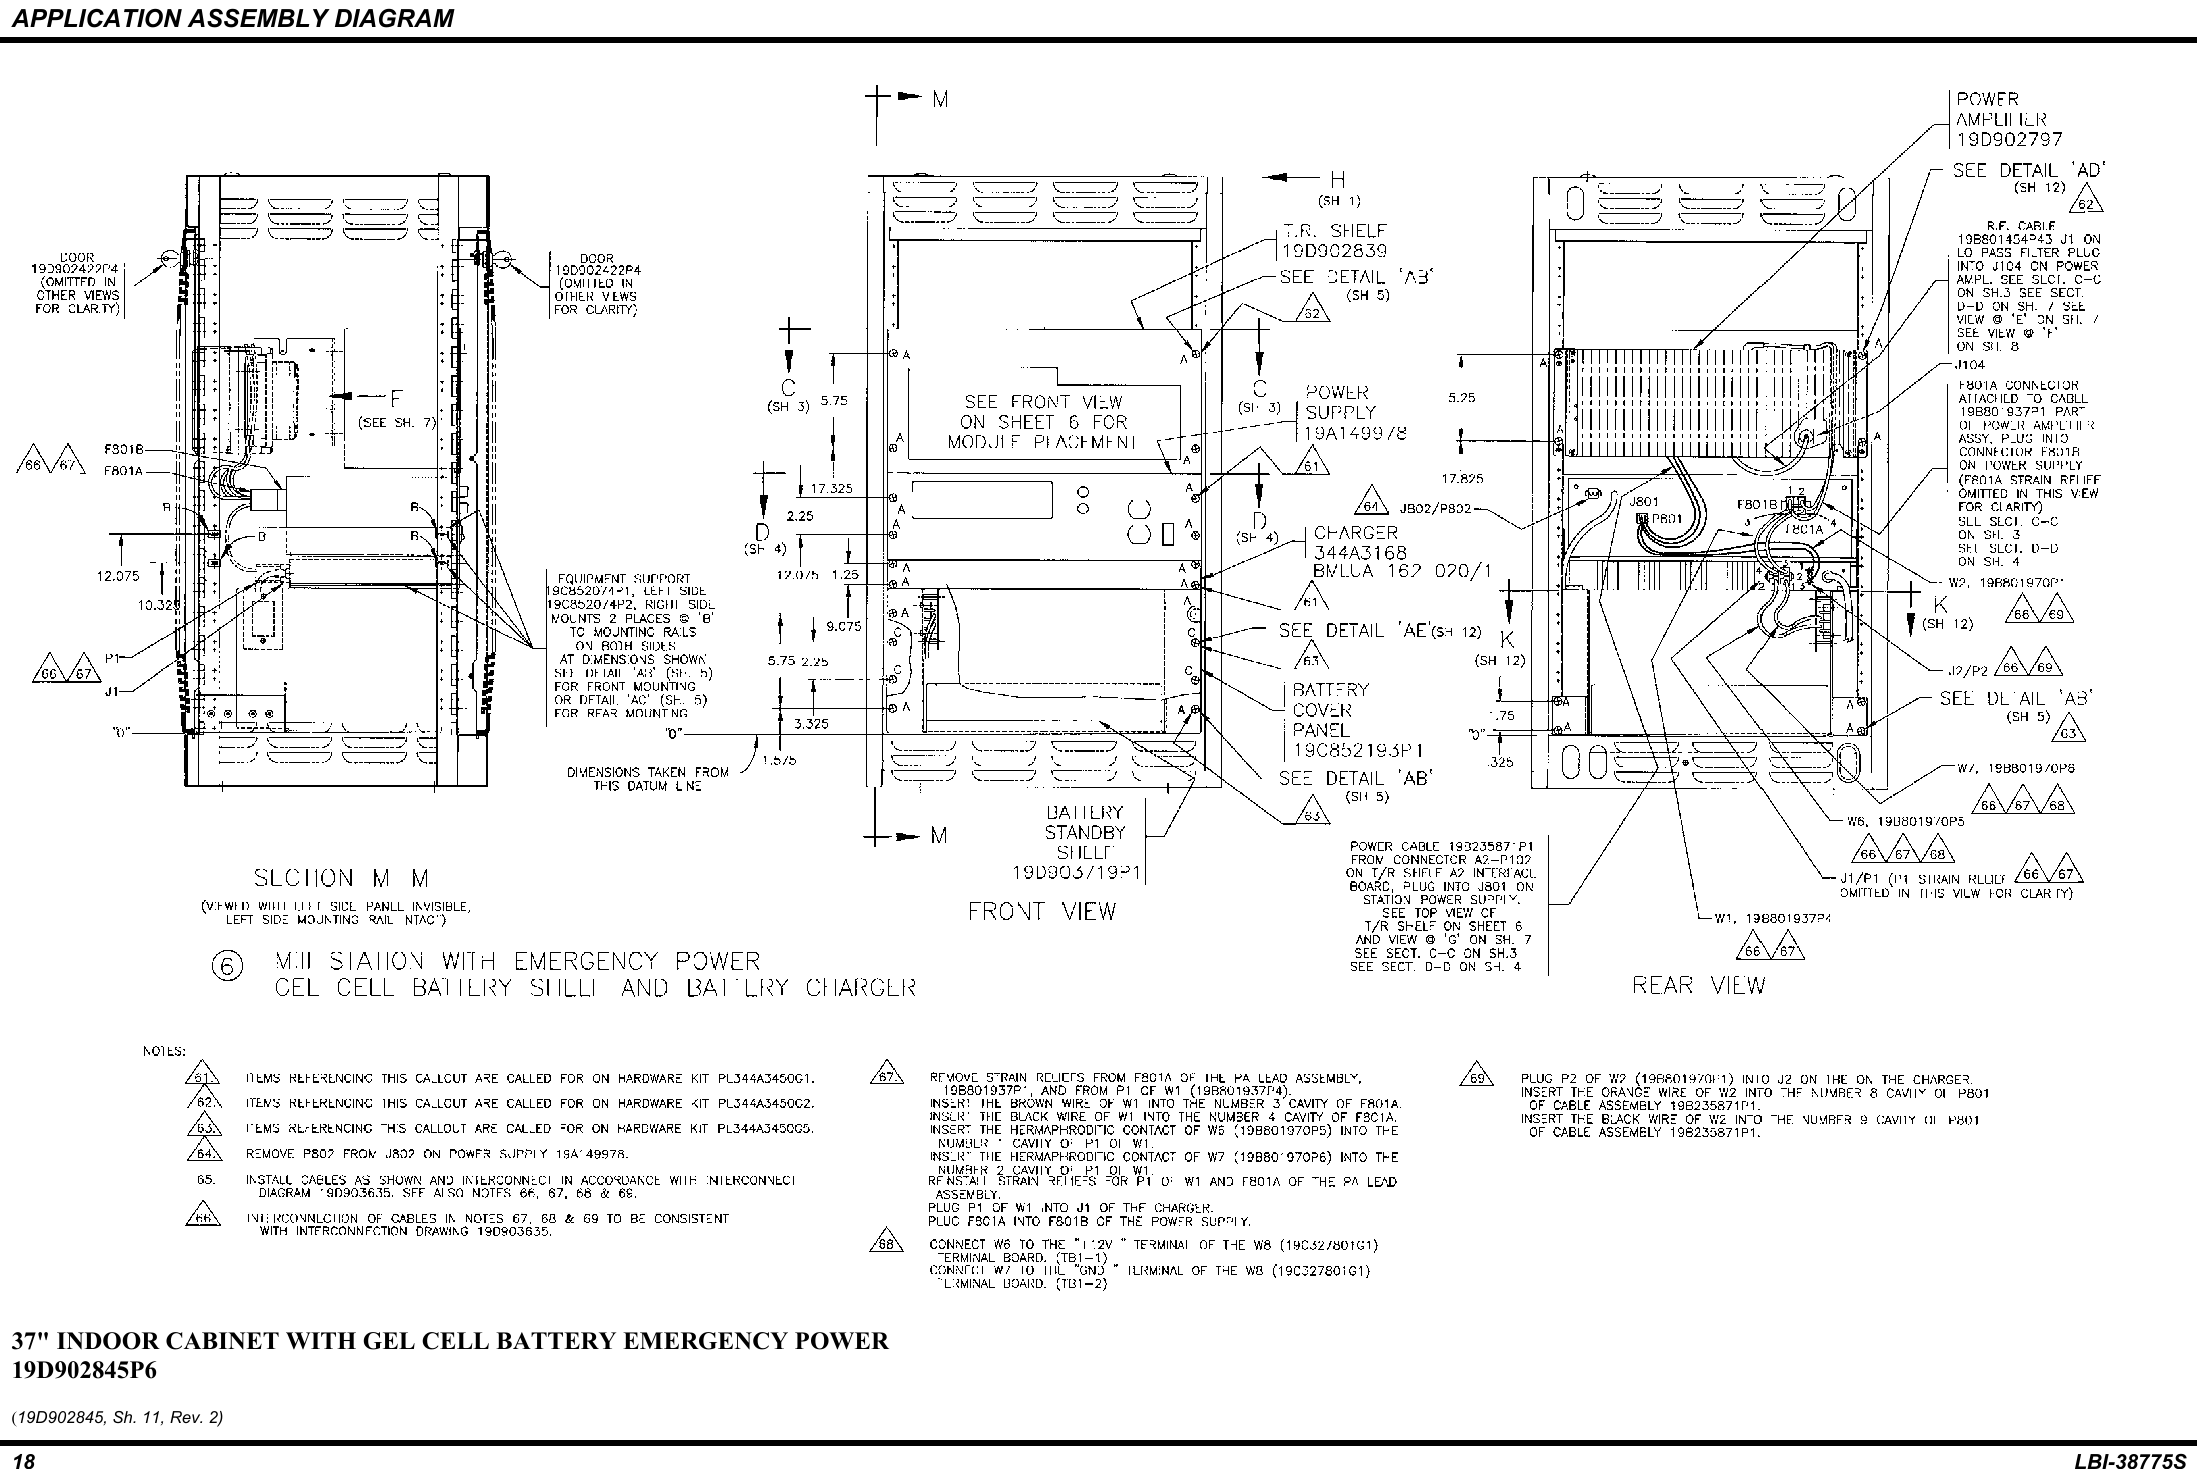 APPLICATION ASSEMBLY DIAGRAM18 LBI-38775S37&quot; INDOOR CABINET WITH GEL CELL BATTERY EMERGENCY POWER19D902845P6(19D902845, Sh. 11, Rev. 2)